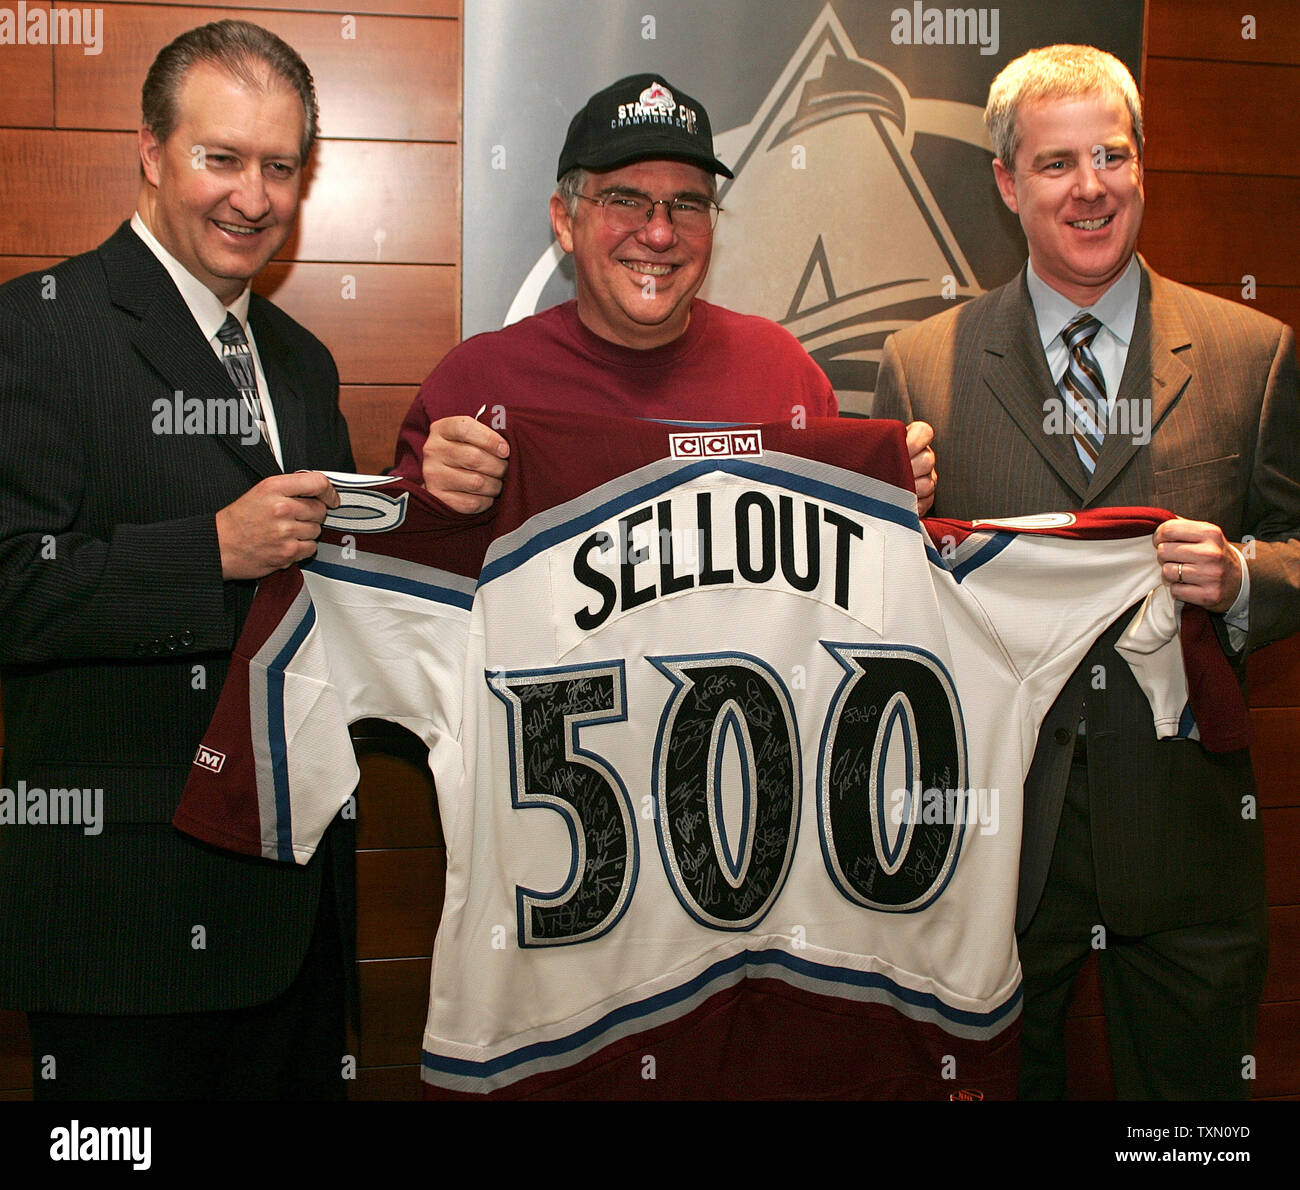 Colorado Avalanche Executive Vice President and General Manager Francois Giguere (R) and Kroenke Sports Enterprises Executive Vice President and Chief Marketing Officer Paul Andrews (L) pose with the 500th fan entering the Pepsi Center, Ray Sherrier of Colorado Springs, the lucky recipient of a signed team jersey commemorating the Avalanche's 500th sellout at the Pepsi Center in Denver January 20, 2007.  All members of the Avalanche signed the jersey presented to  Sherrier.  (UPI Photo/Gary C. Caskey) Stock Photo